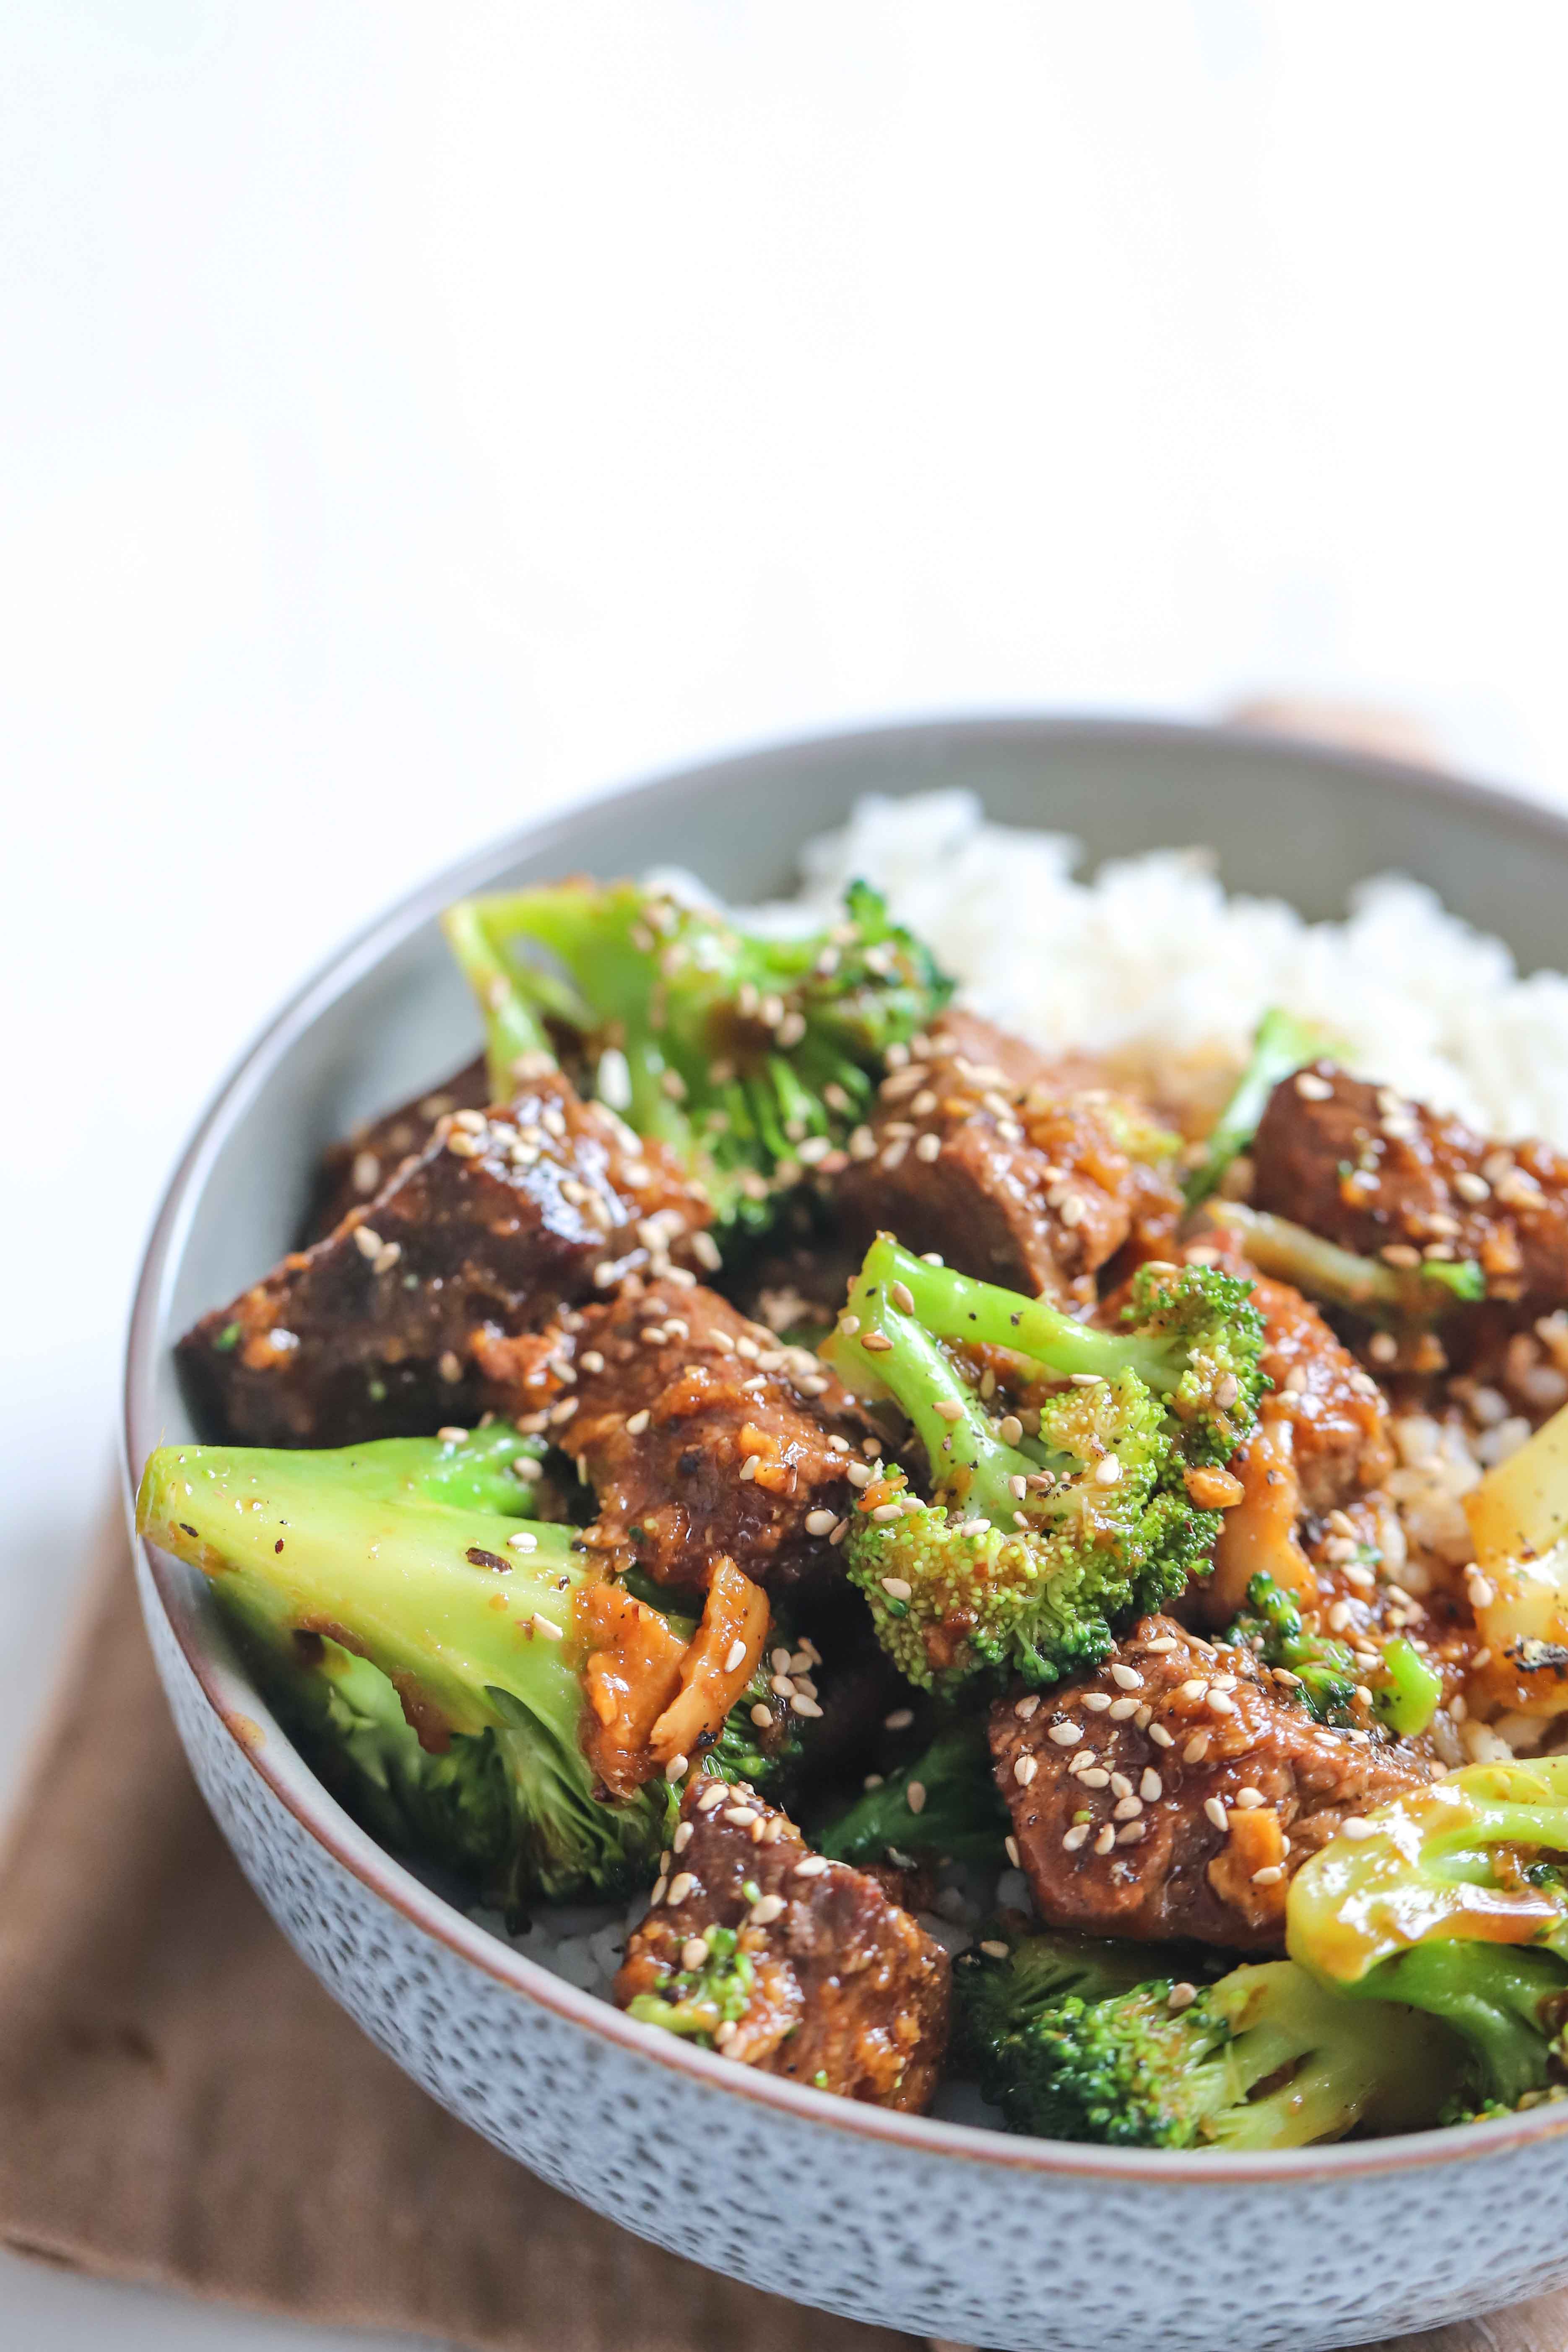 Beef and Broccoli Stir Fry. Quick and healthy dinner that is so delicious you'll want seconds.